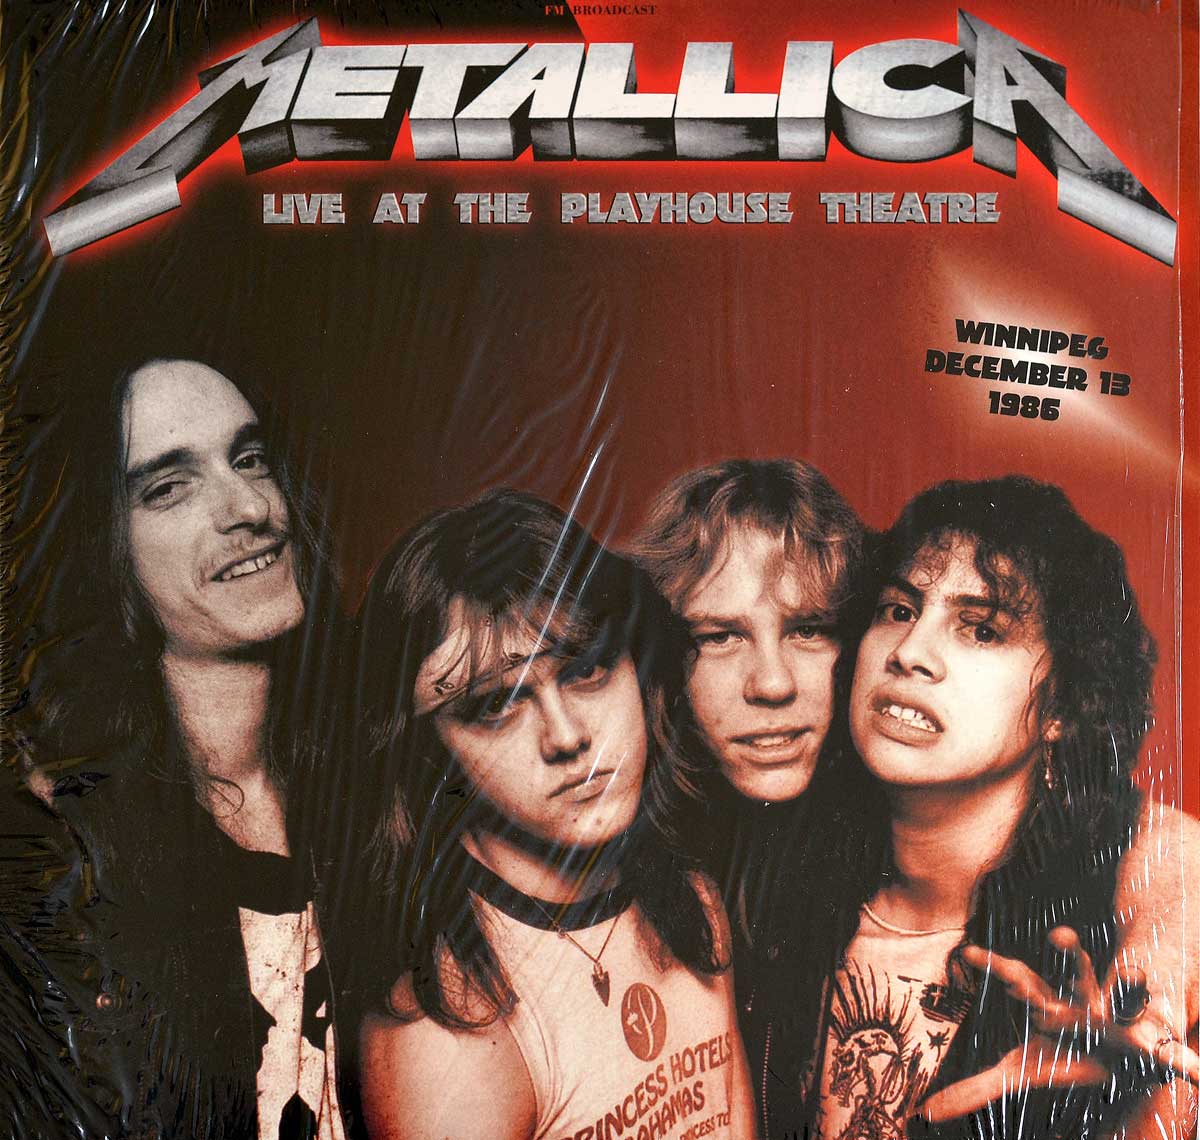 Front Cover Photo Of METALLICA - Live at the Playhouse Theatre Winnipeg 1986 